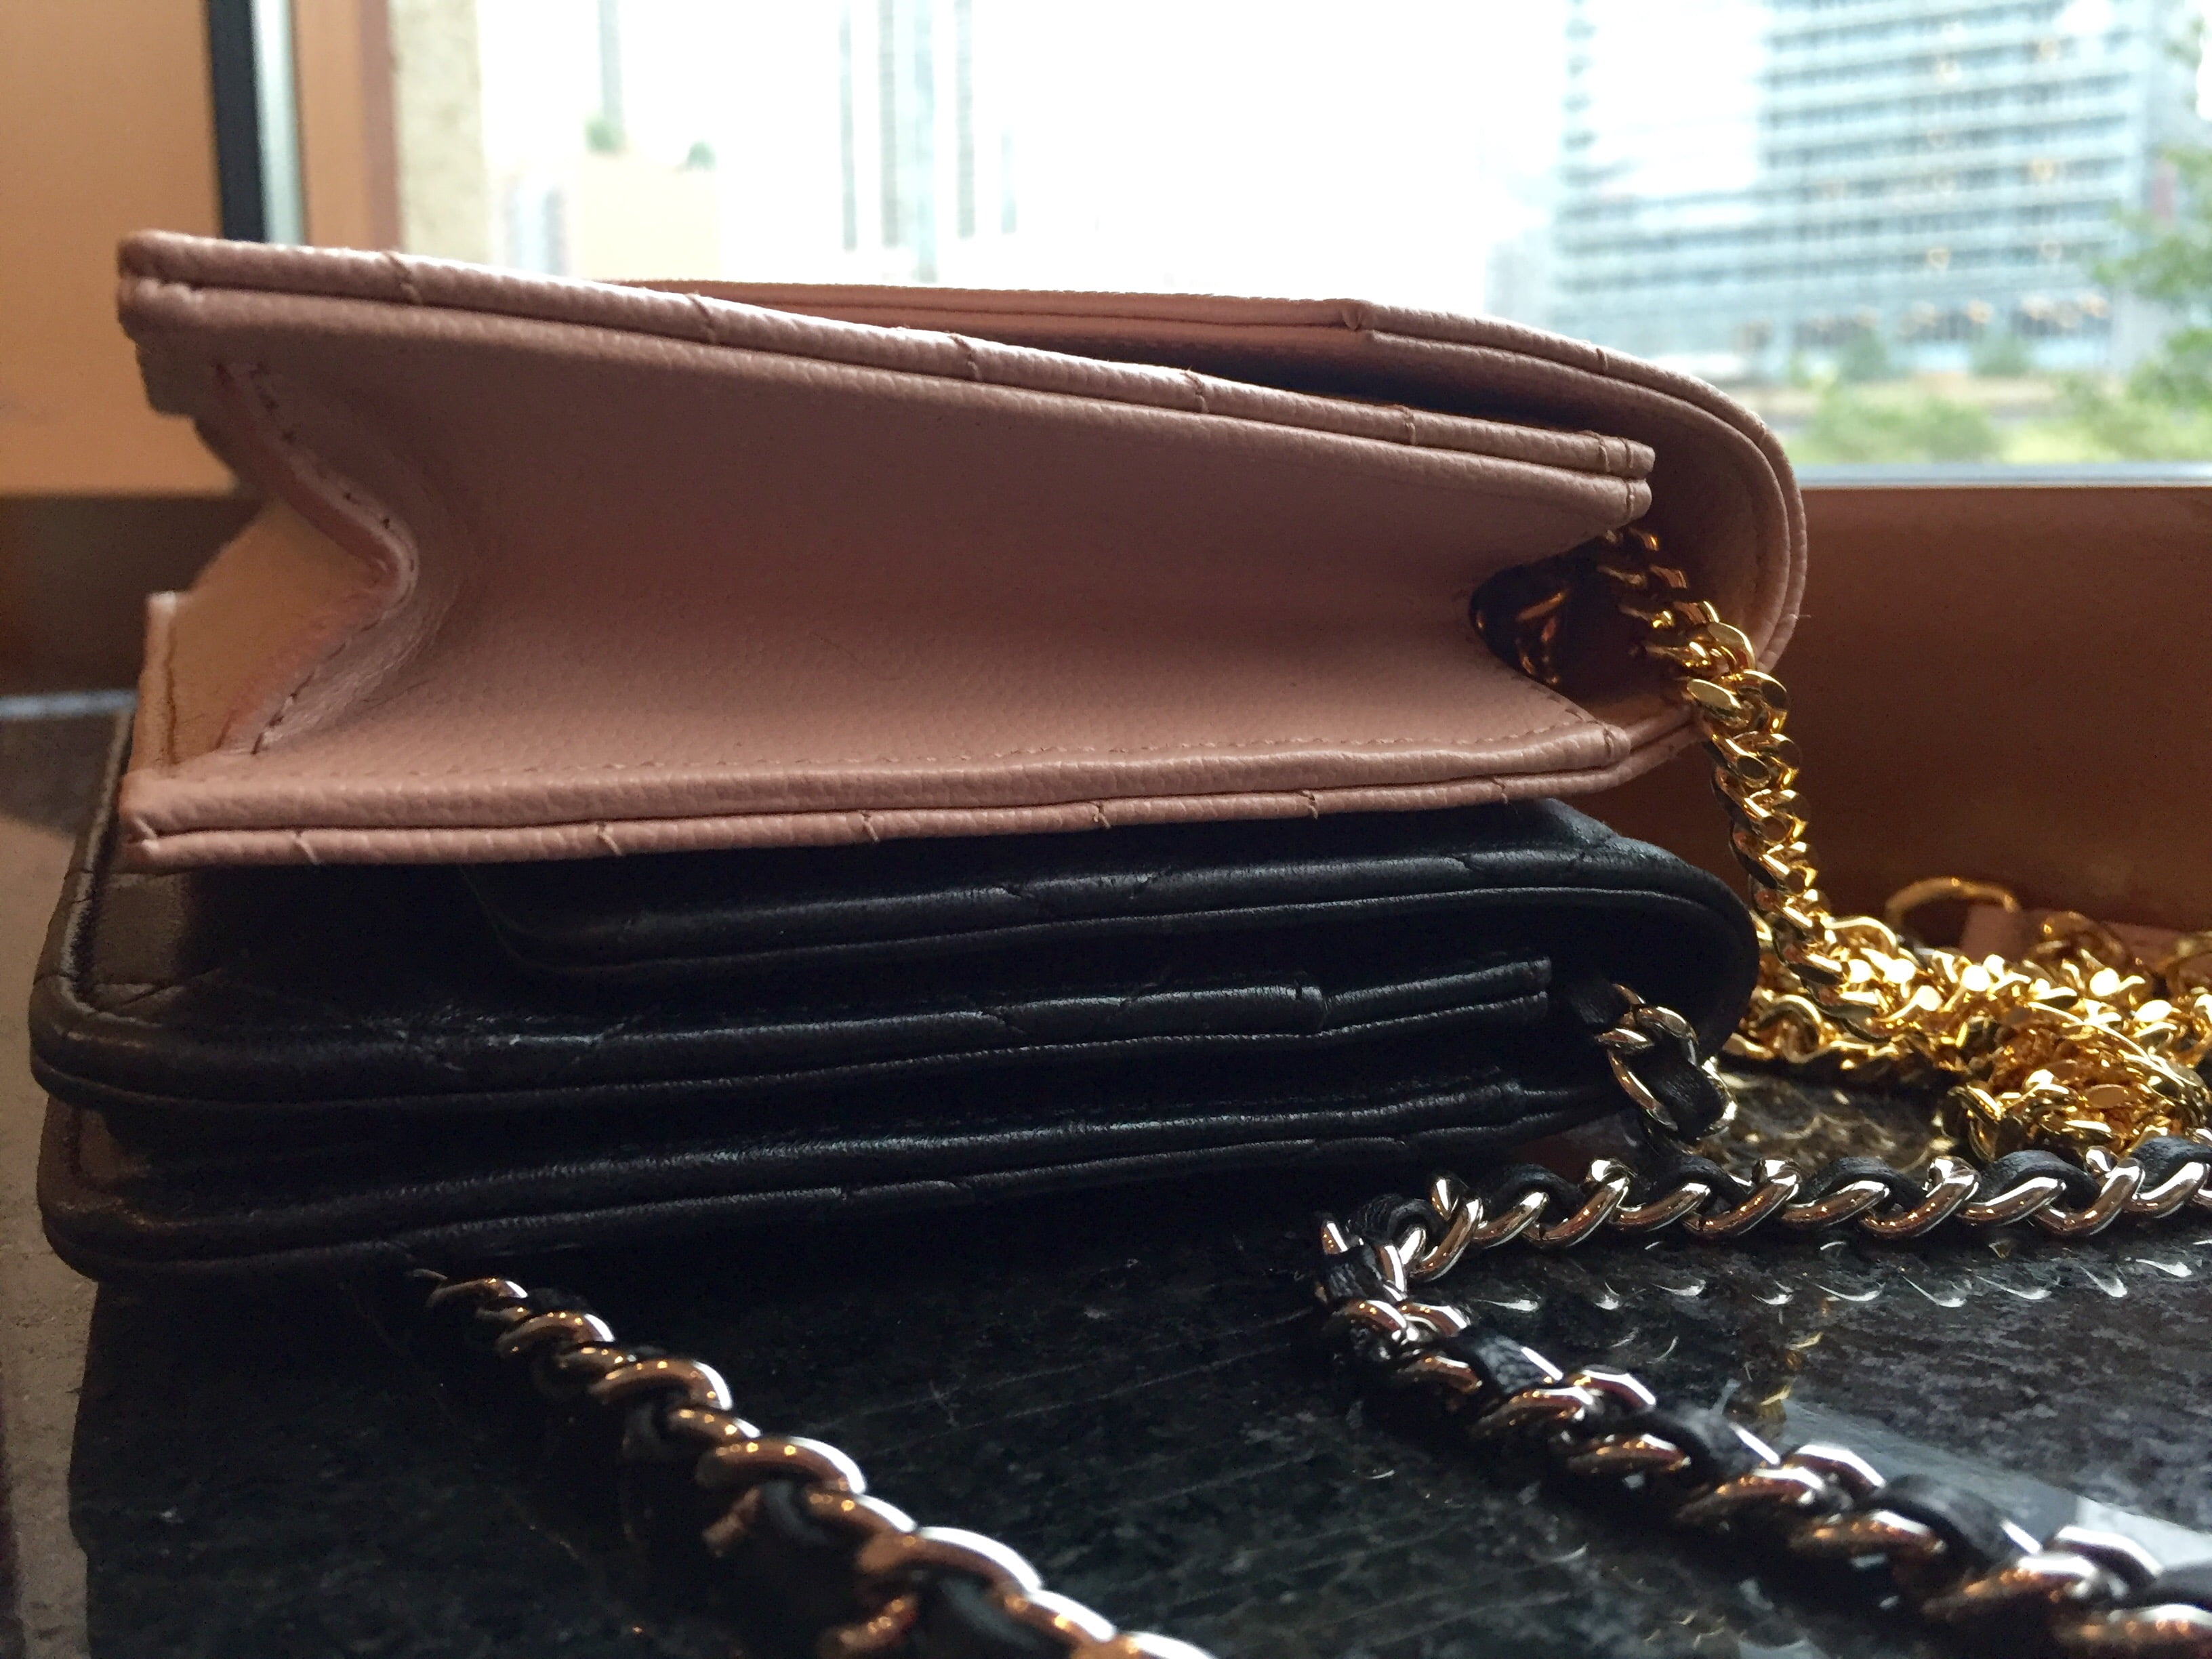 YSL Wallet on Chain: Review SAINT LAURENT monogram chain wallet what fits,  modeling shots, worth it? 